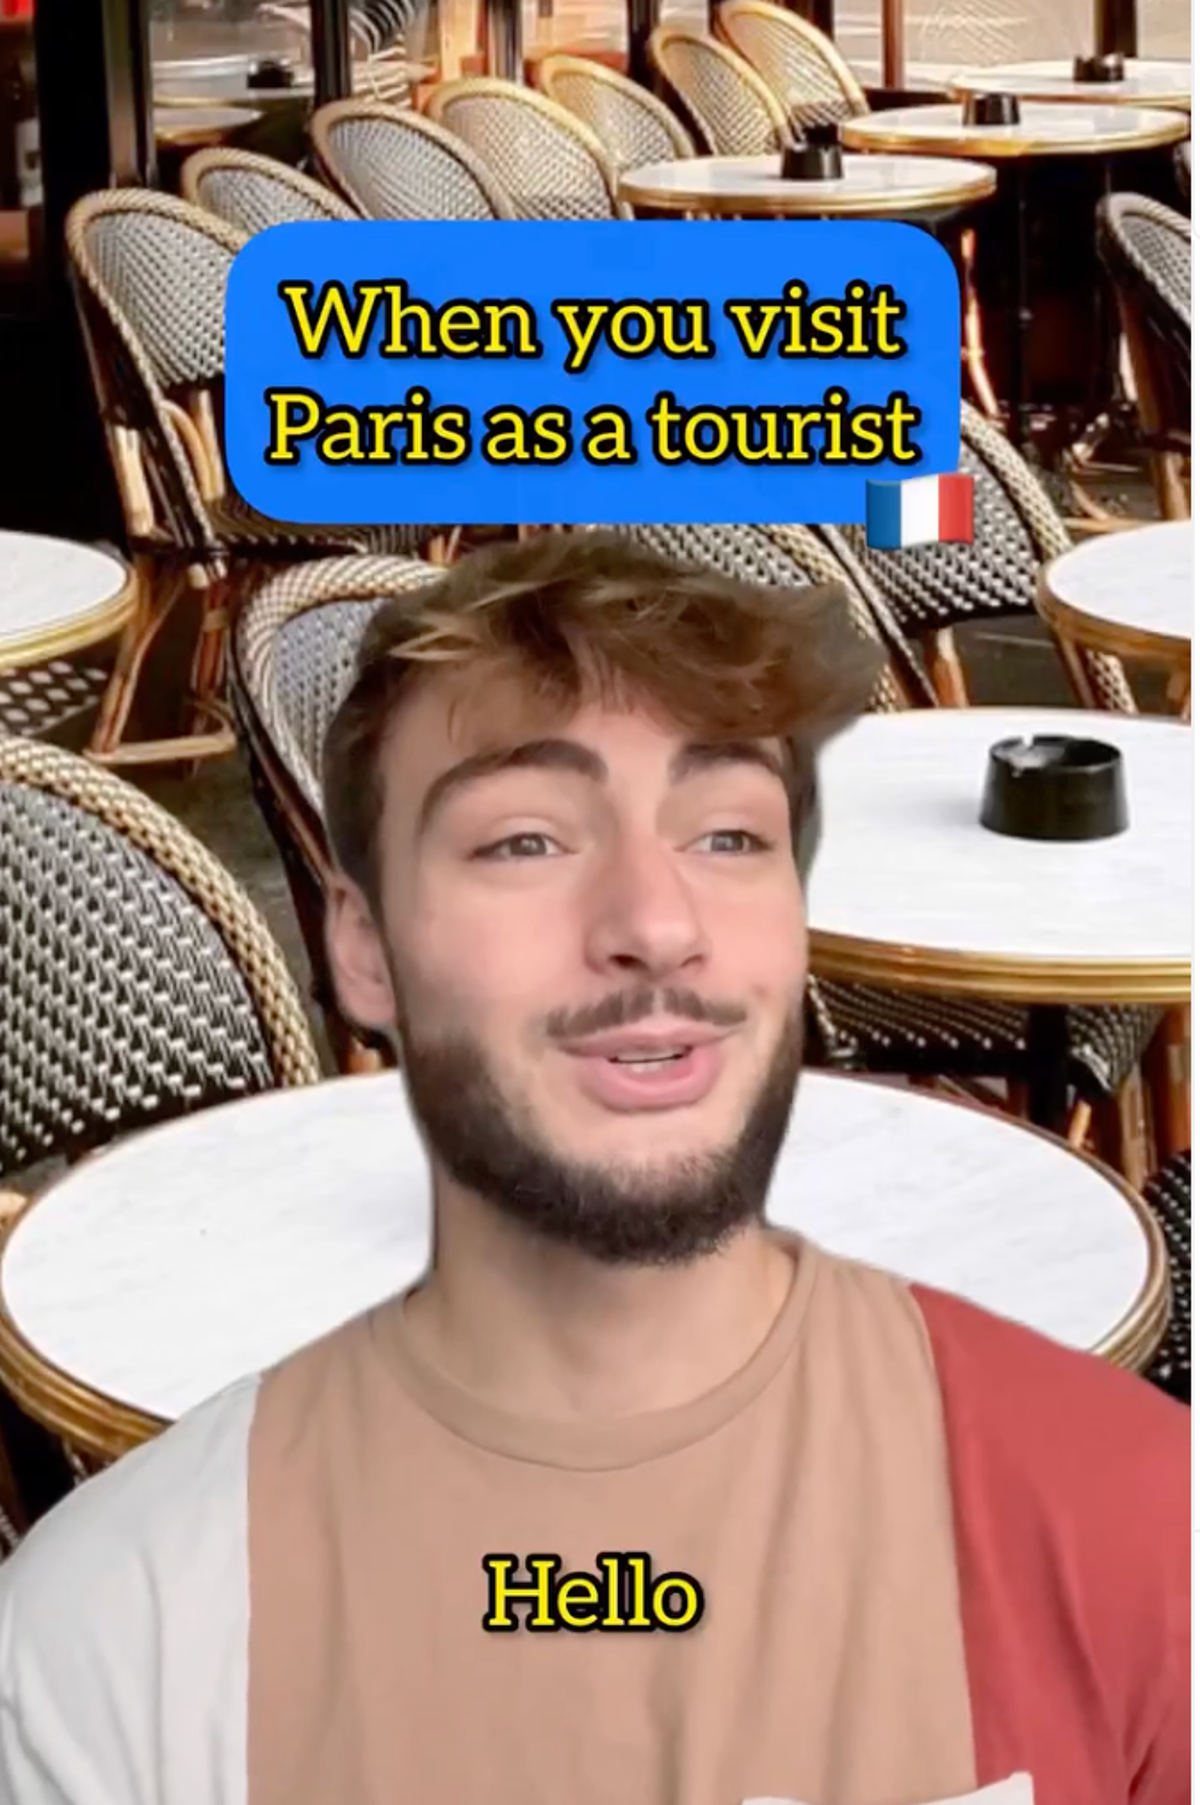 Tourists warned not to bother trying to speak French in comedy video